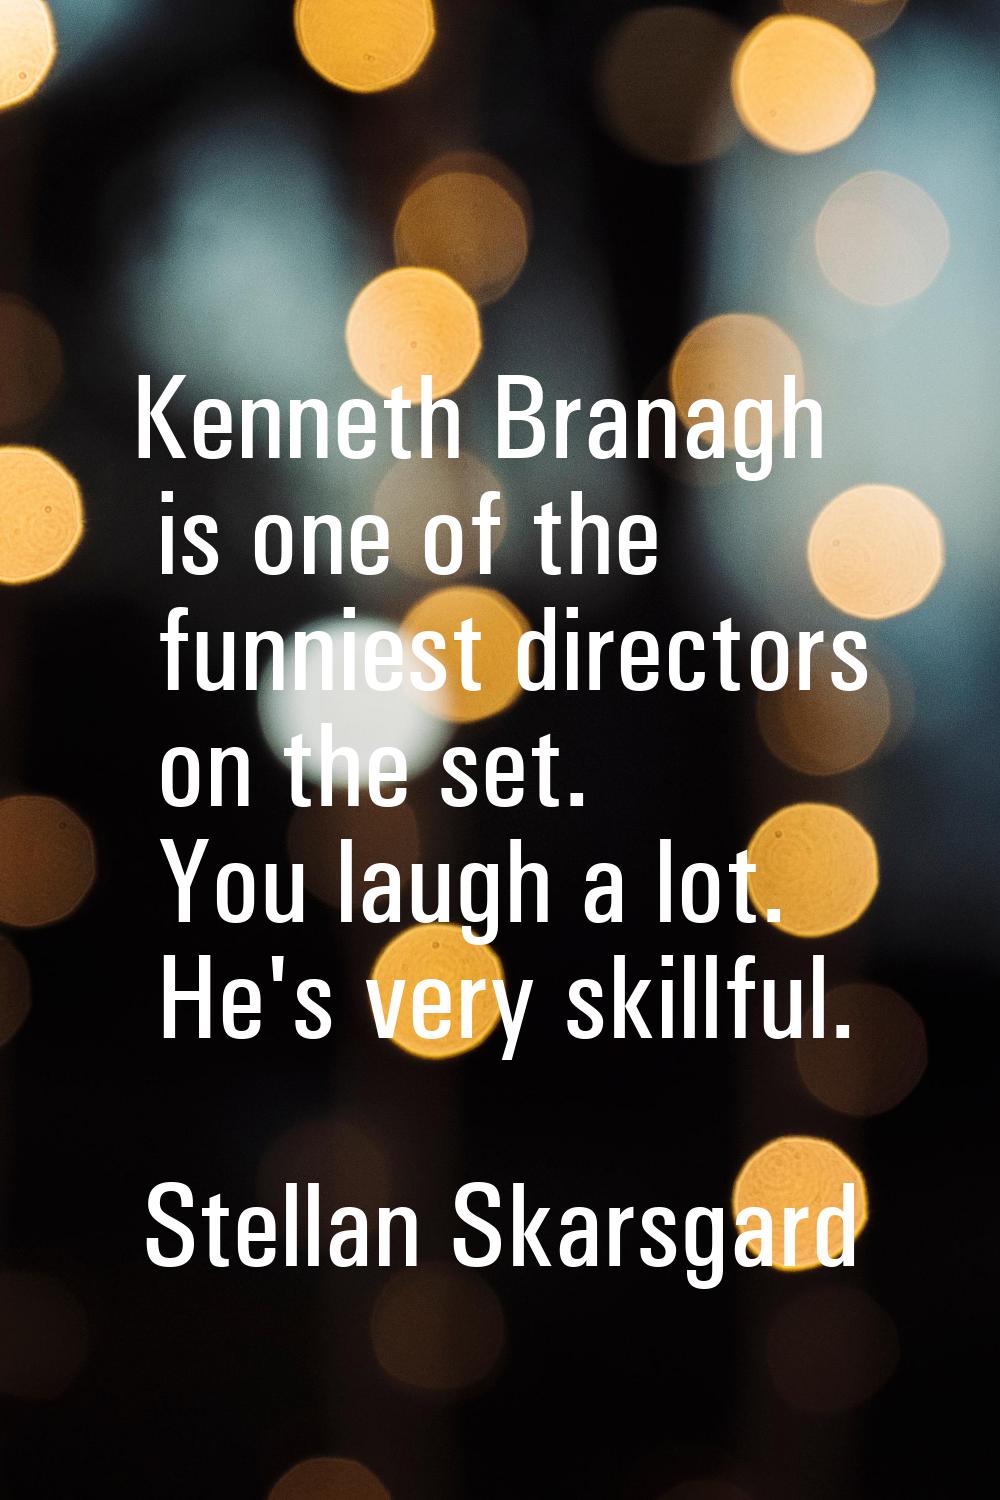 Kenneth Branagh is one of the funniest directors on the set. You laugh a lot. He's very skillful.